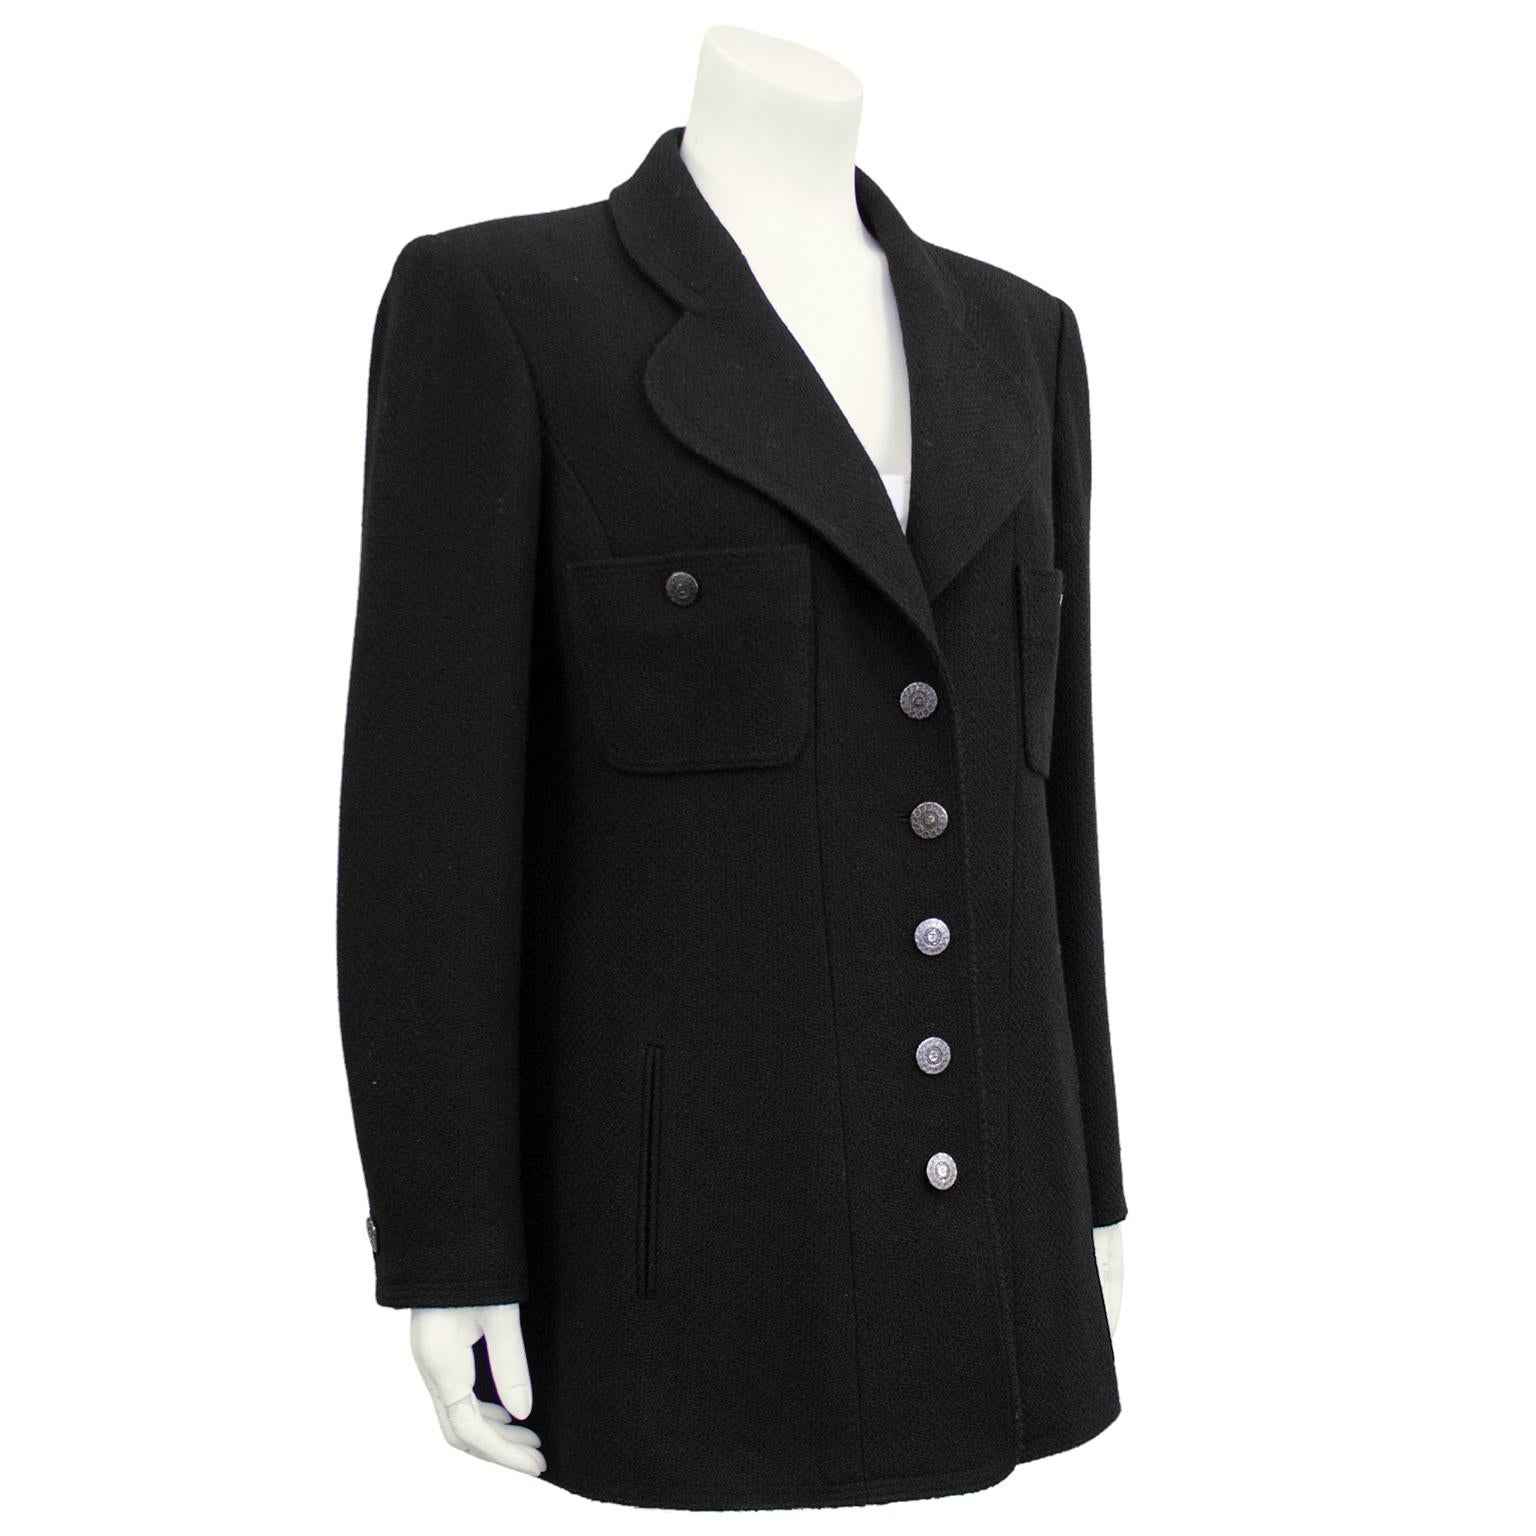 Classic and always chic Chanel black wool jacket from the Fall 1997 collection. Long sleeve with two patch pockets at bust and slanted slit pockets at hips. Silver detailed cc logo buttons down front, on patch pockets and at cuffs. Strong shoulder